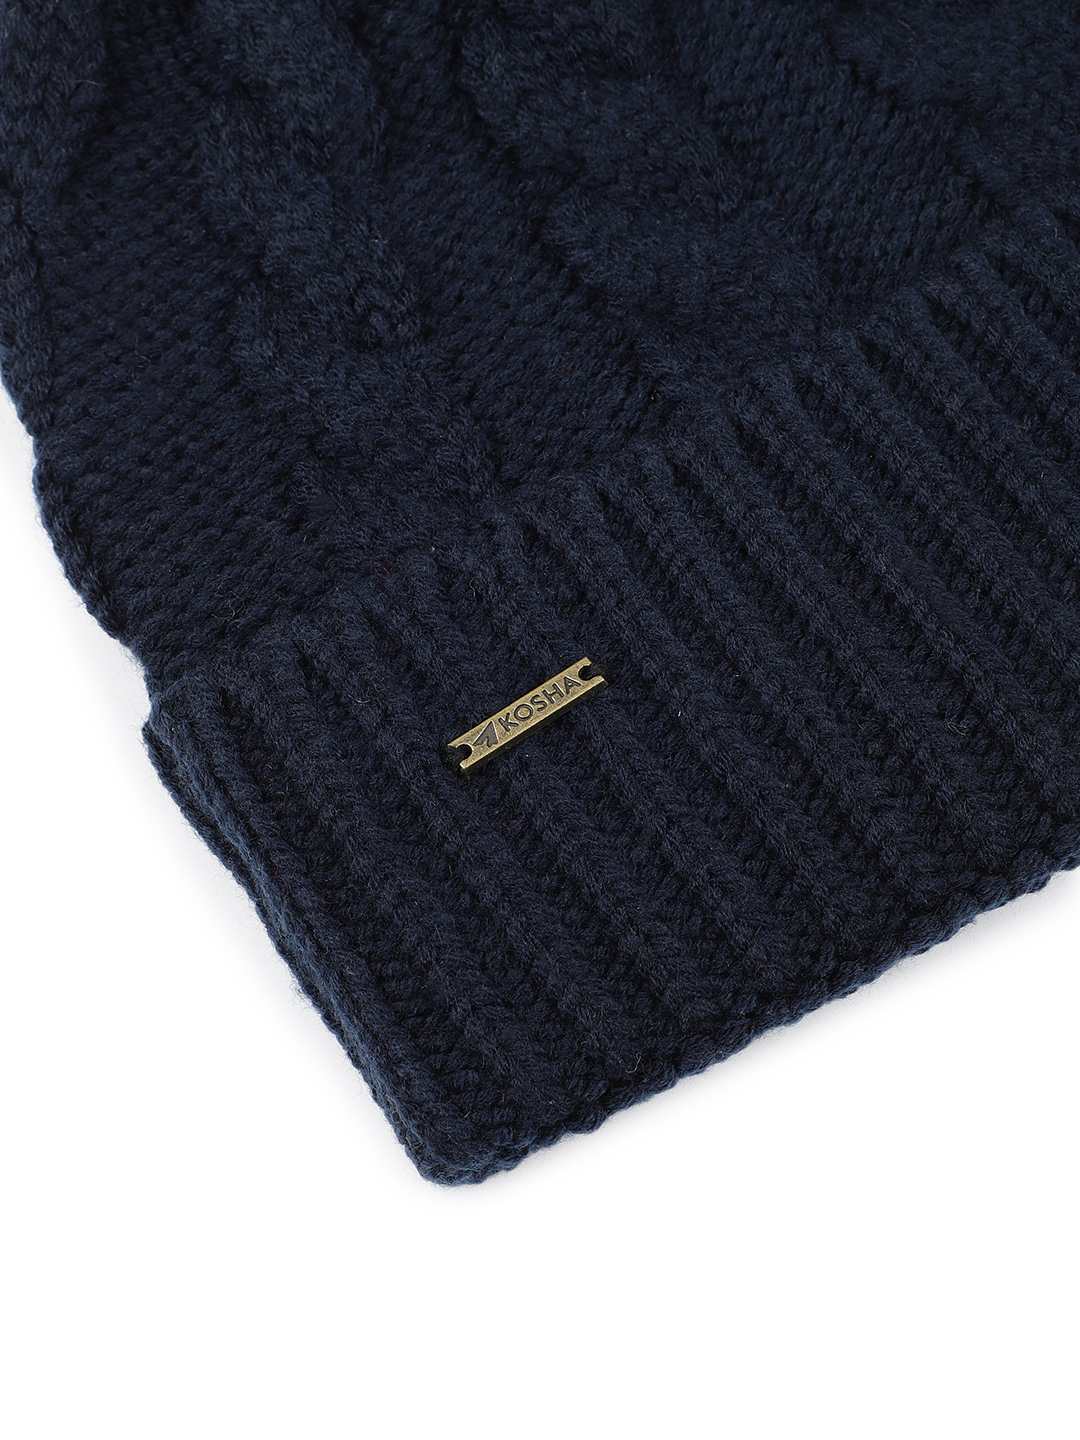 Navy Blue Acrylic Wool Cable Knit Winter Beanie | Women